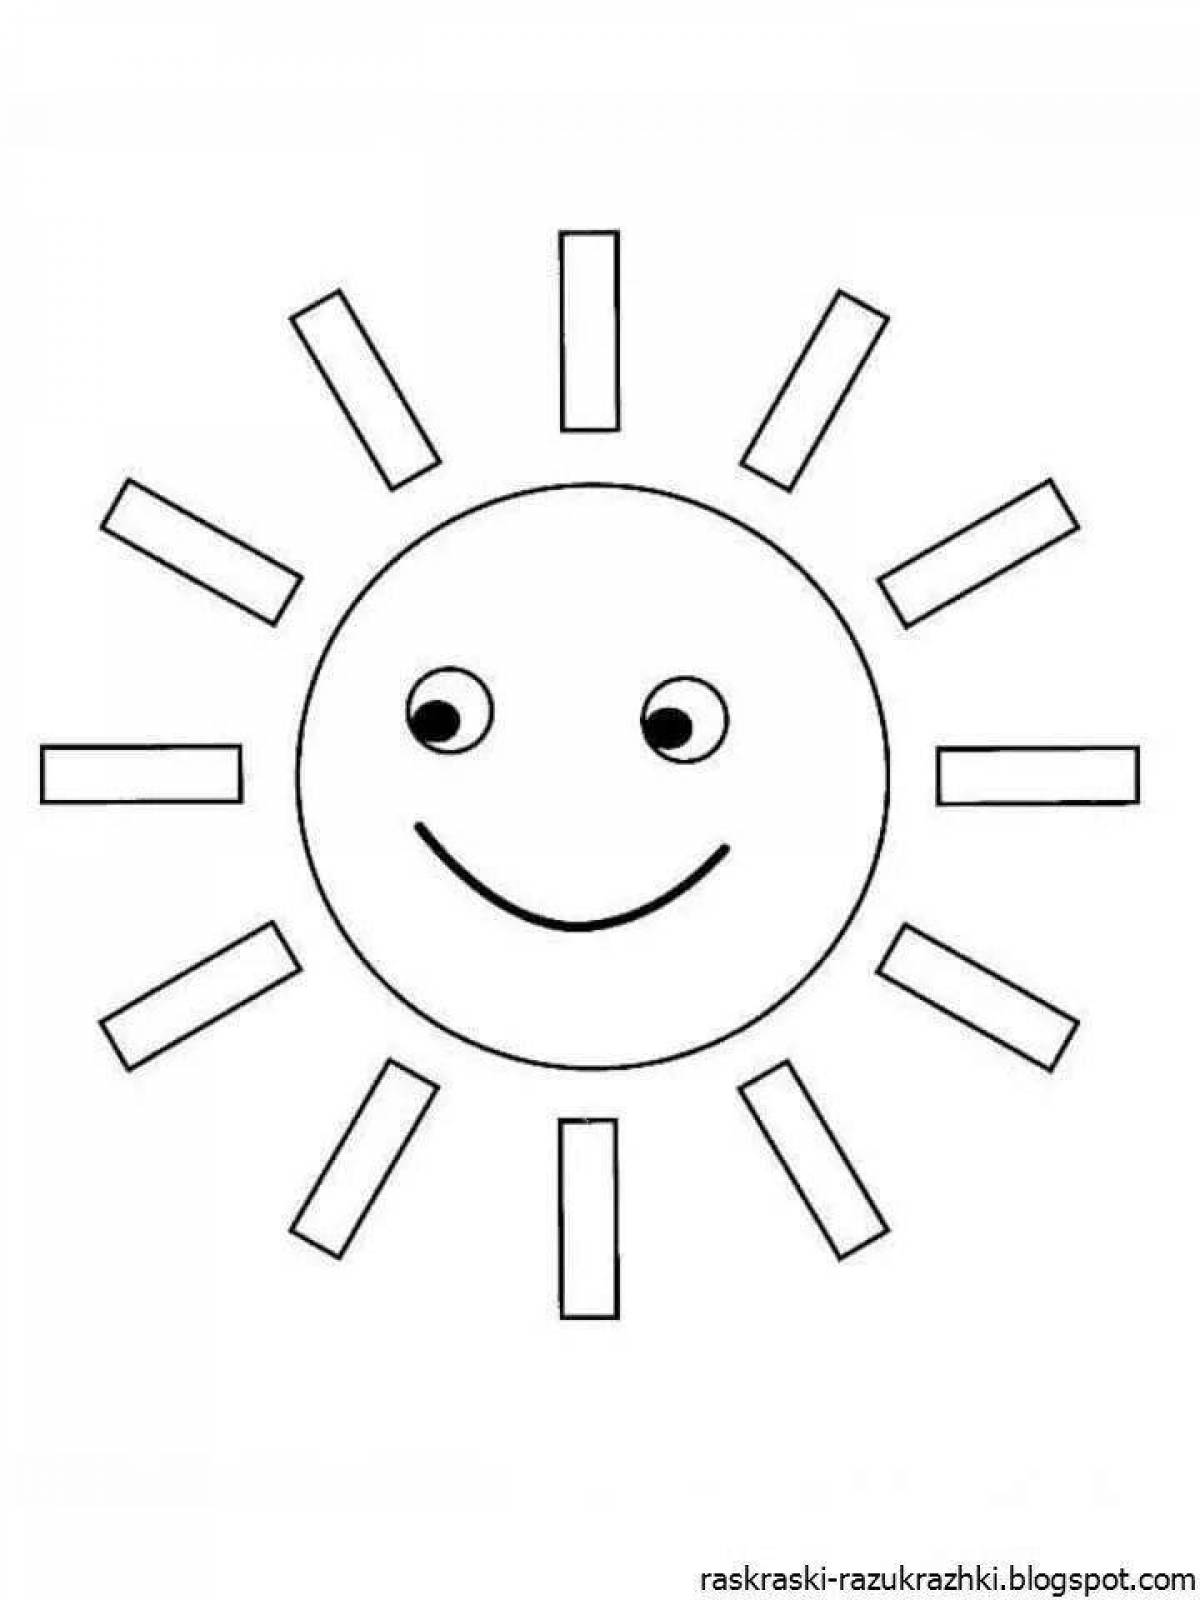 Attractive sun coloring book for 2-3 year olds